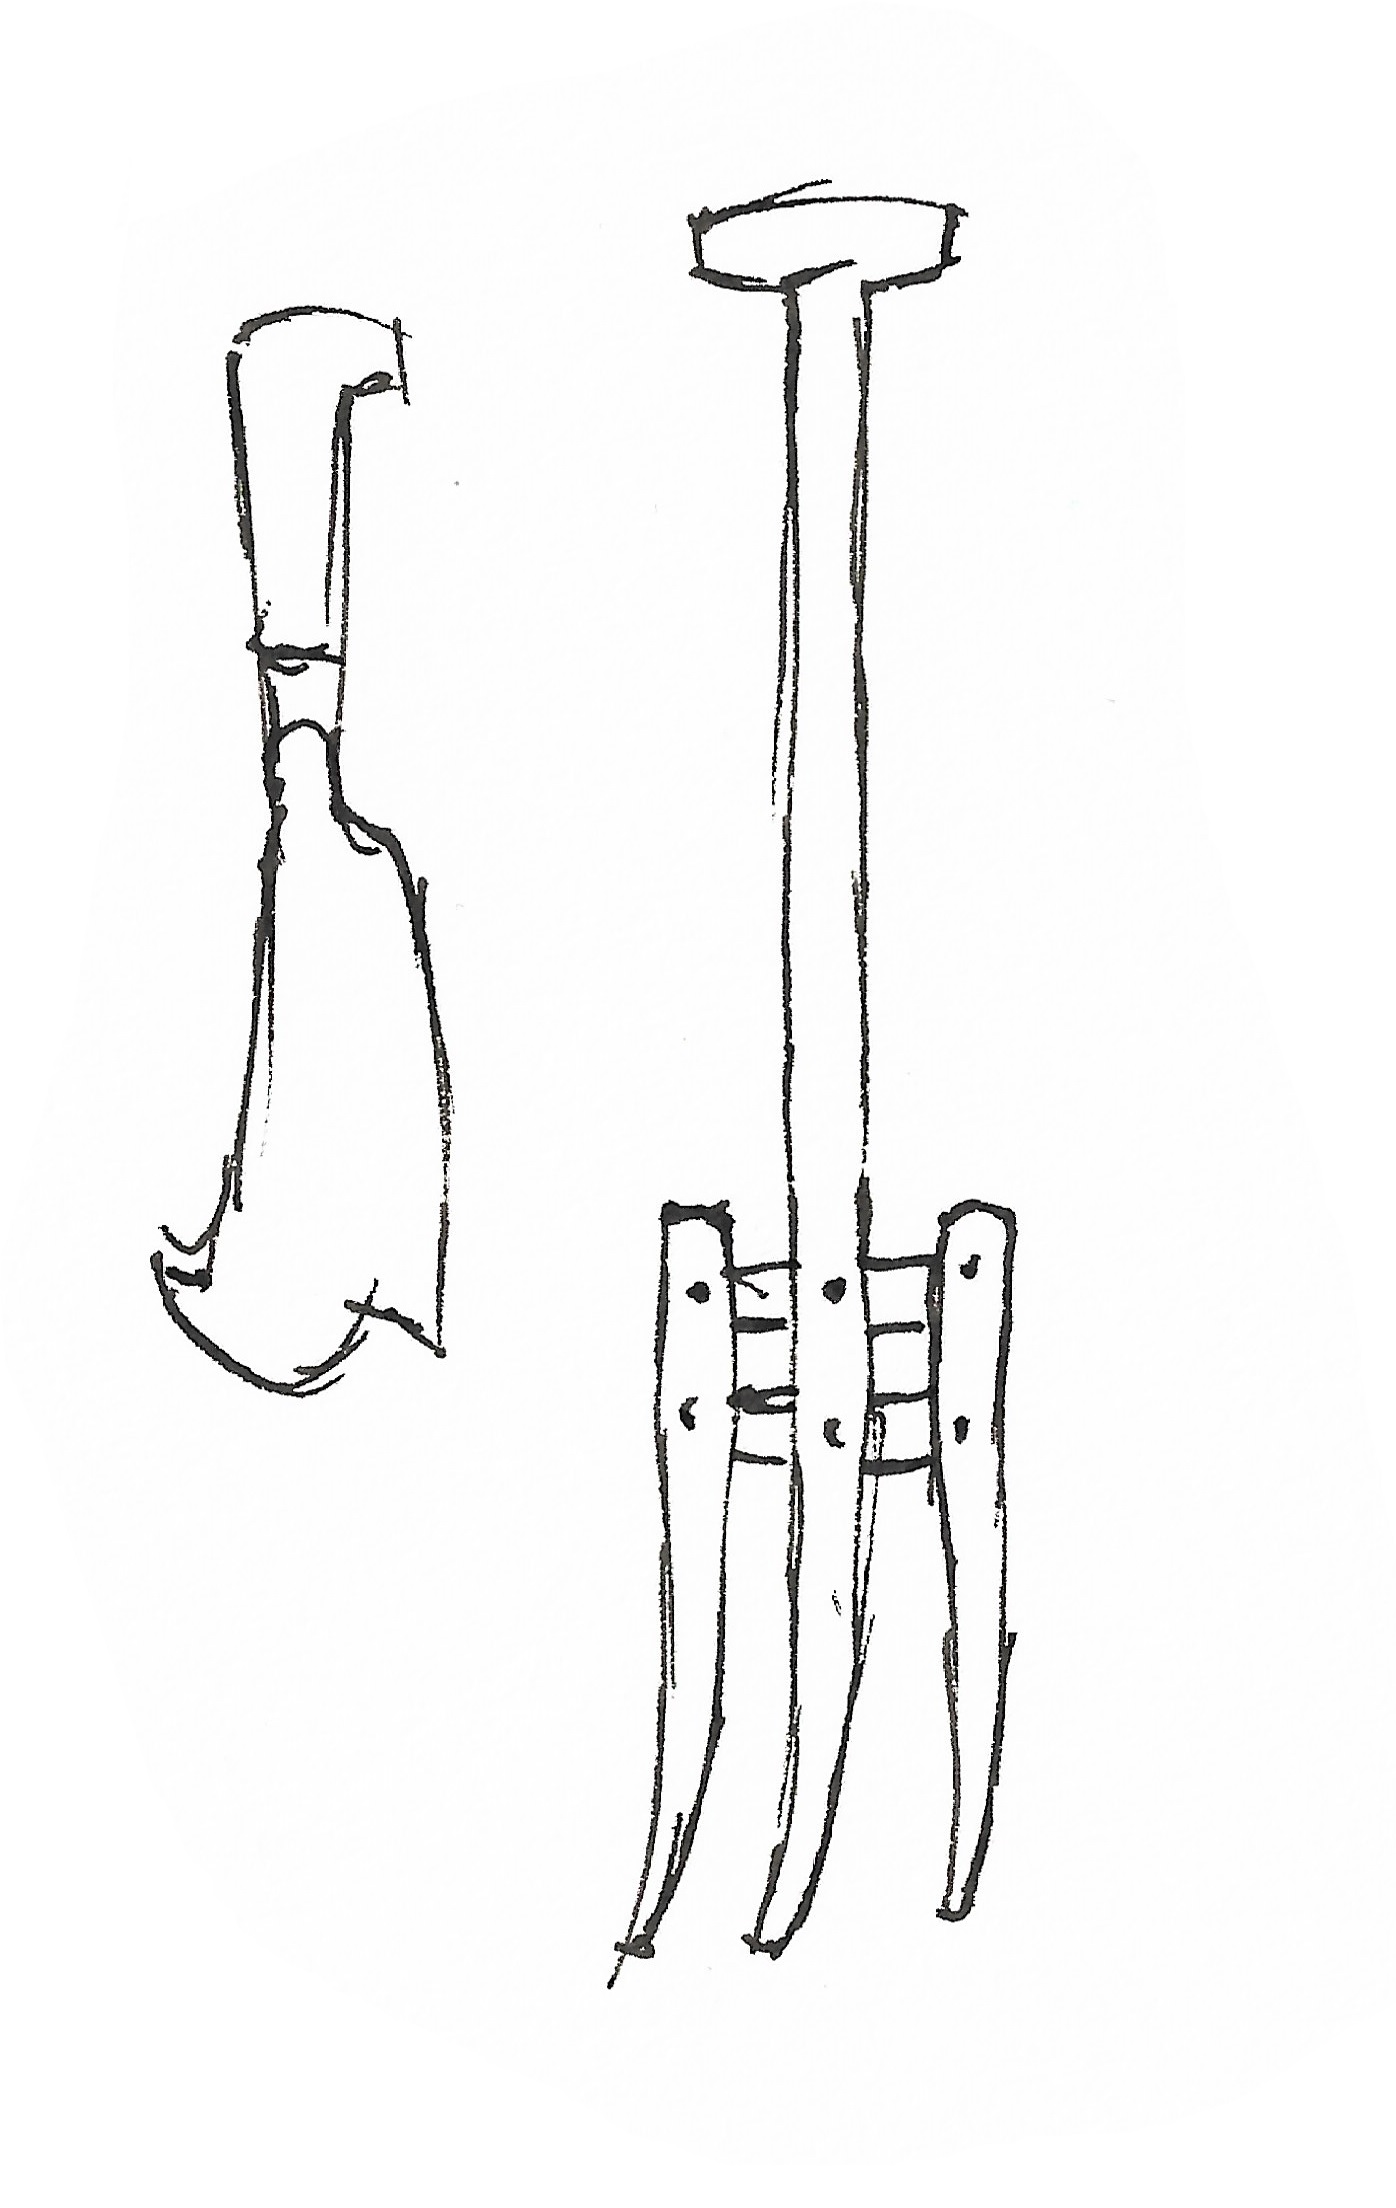 Drawing of a pitchfork and one more tool